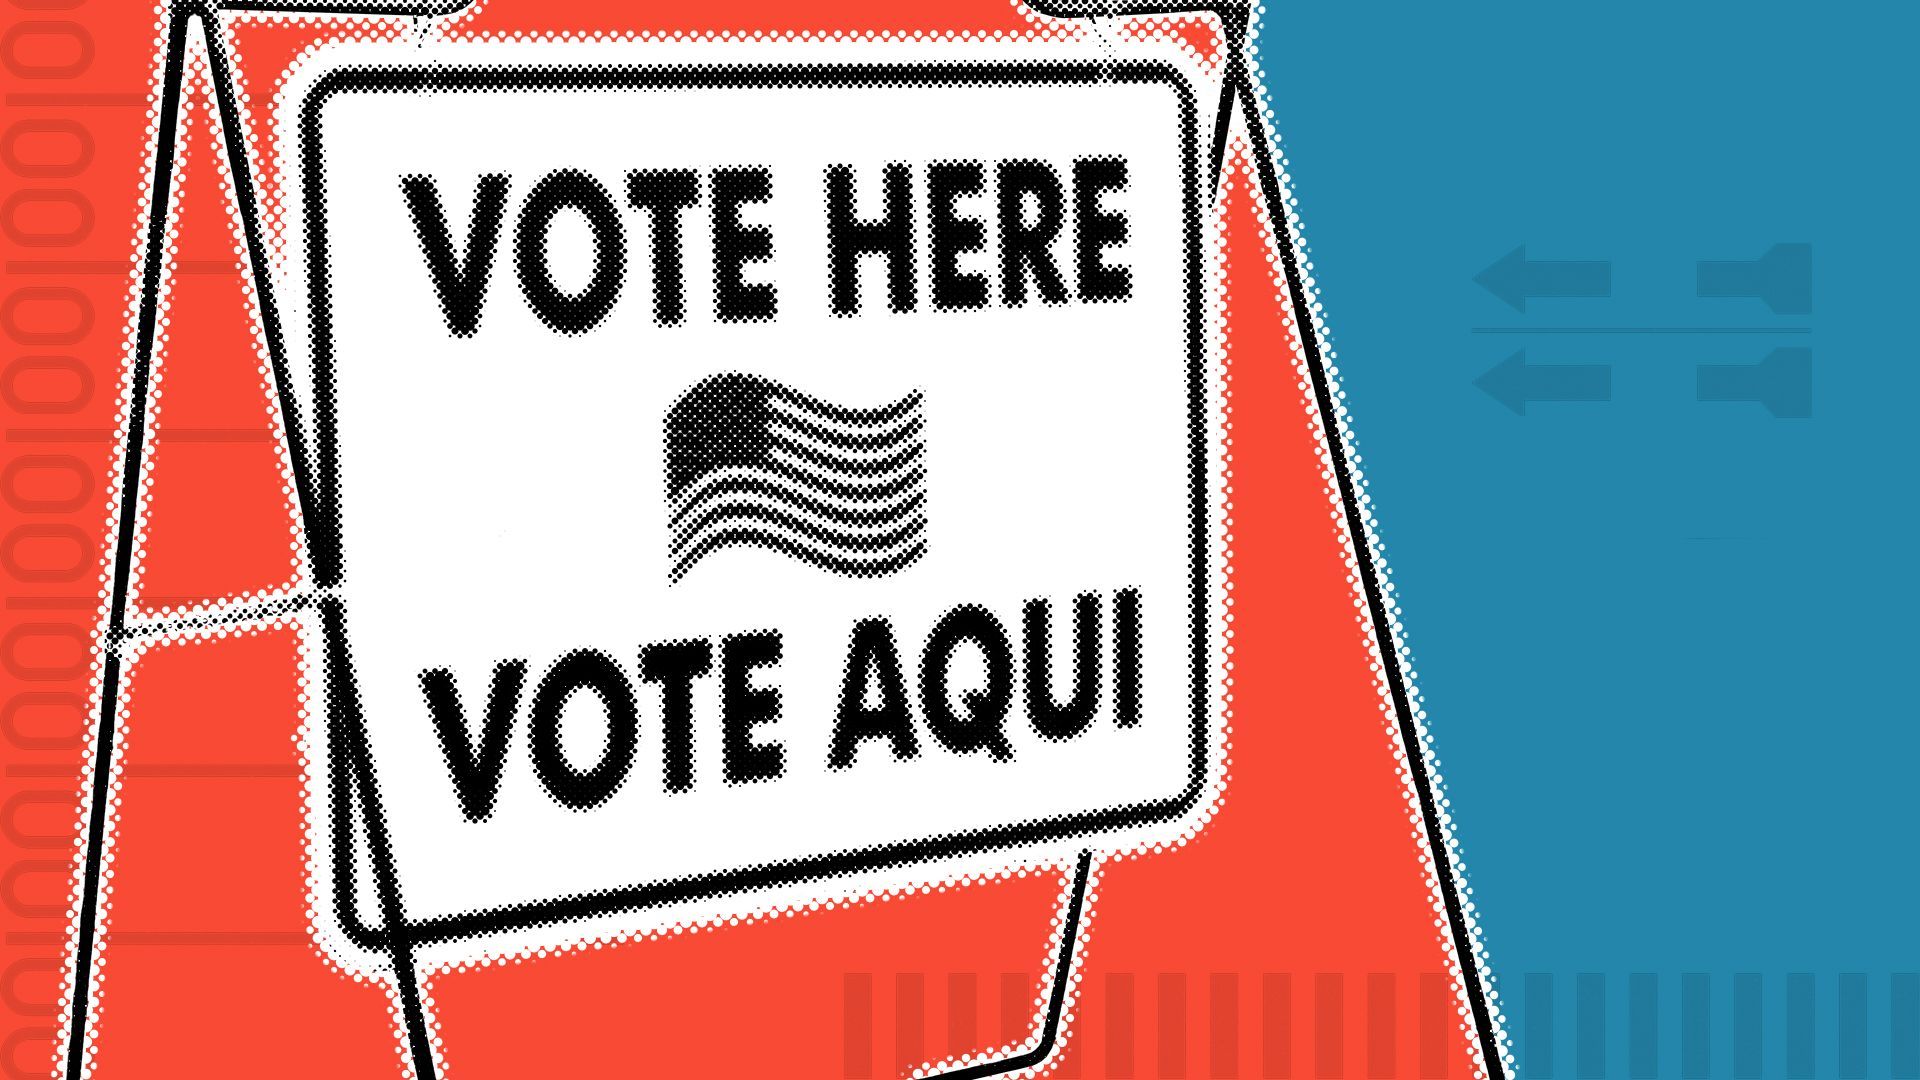 Illustration of a sign that reads "Vote Here, Vote Aqui" surrounded by ballot elements.